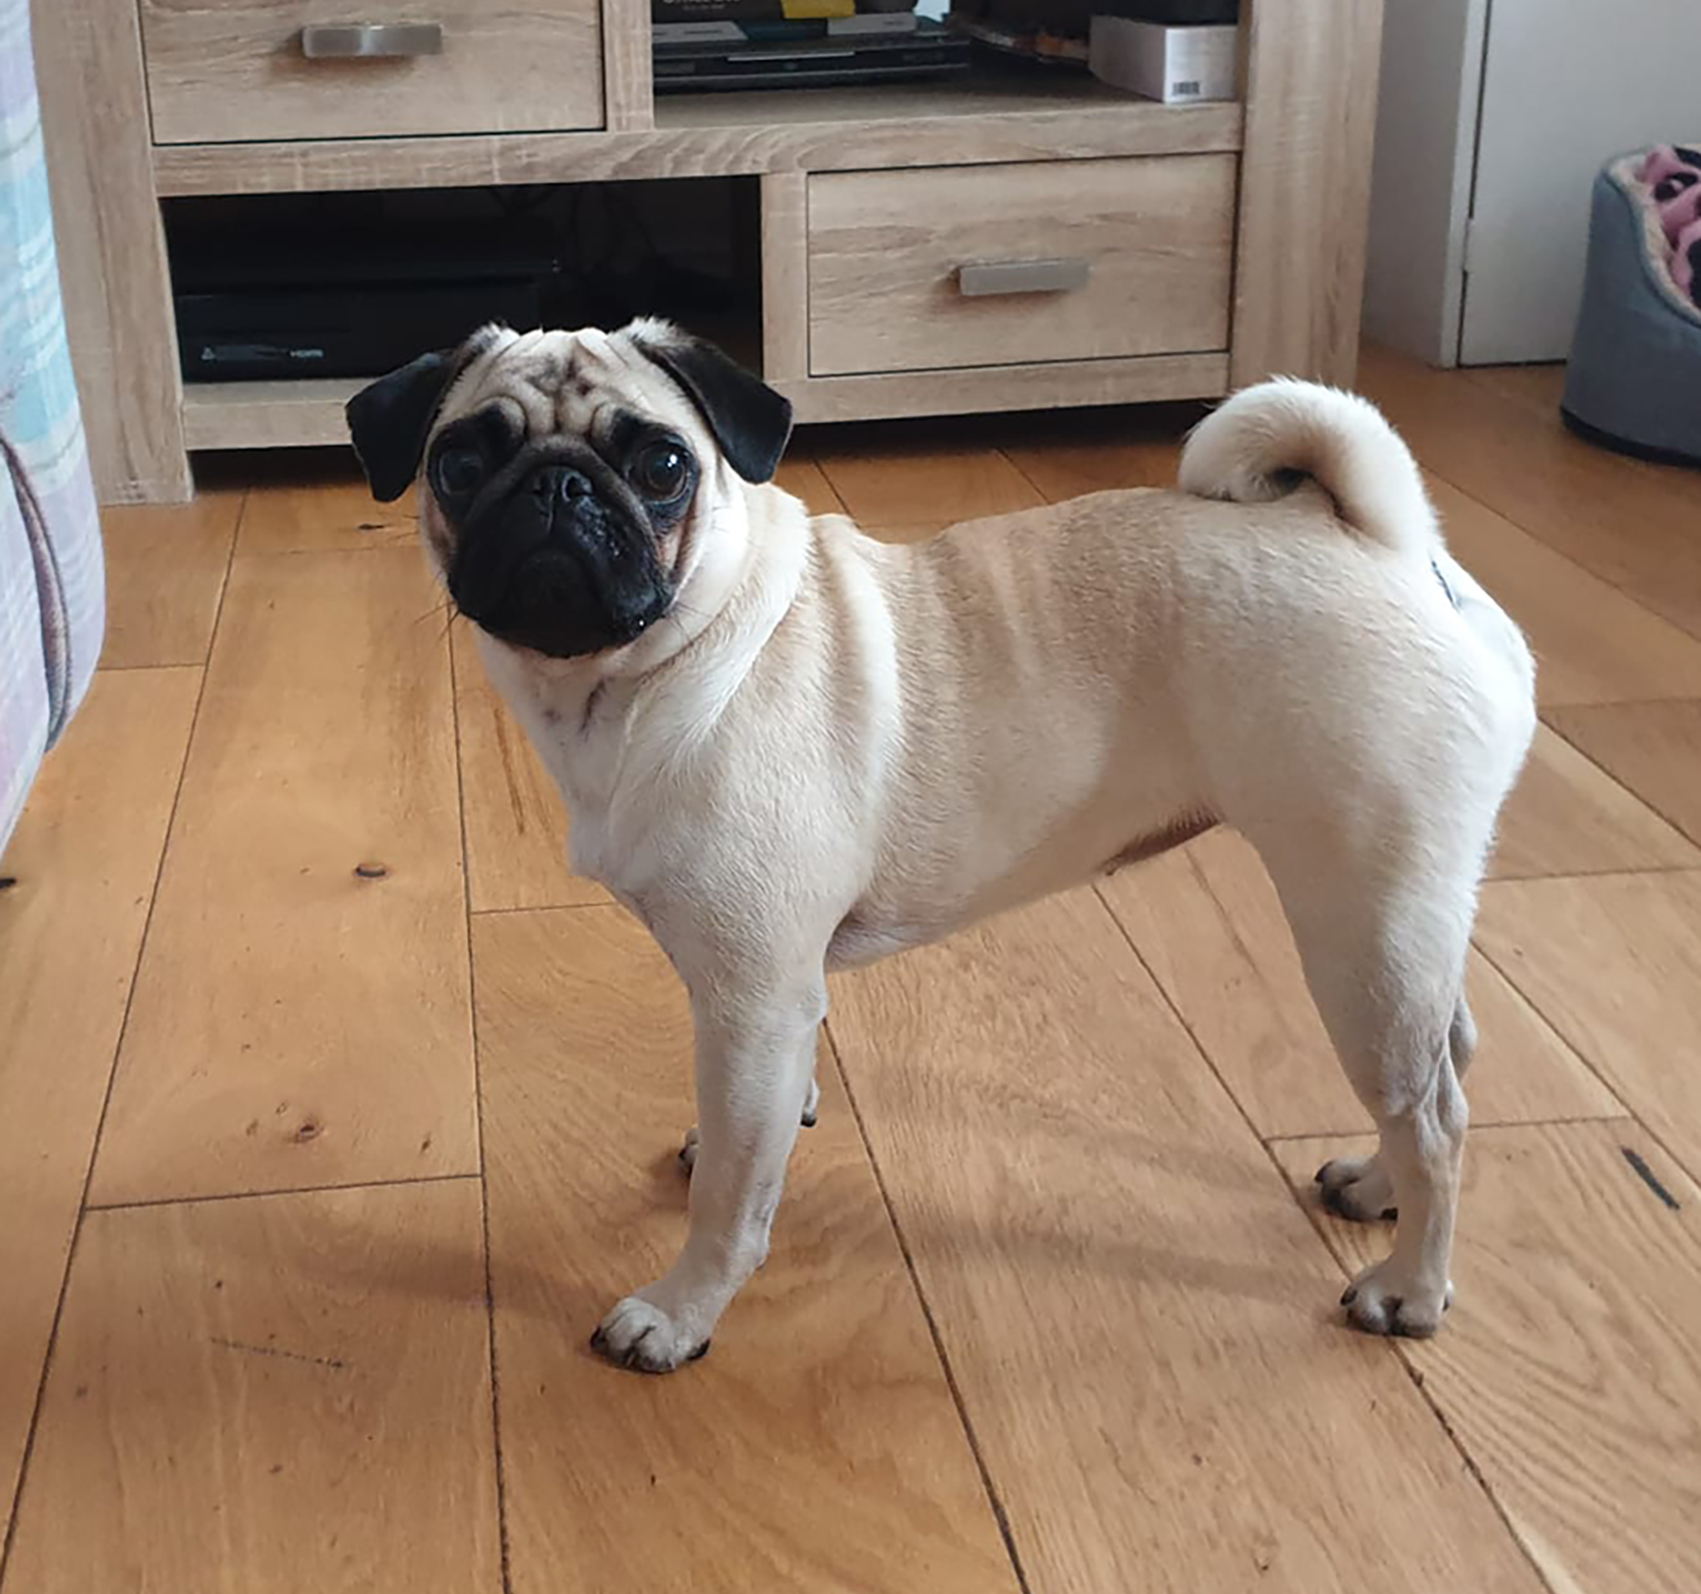 Adoption for Daisy - image Susie on https://pugprotectiontrust.org